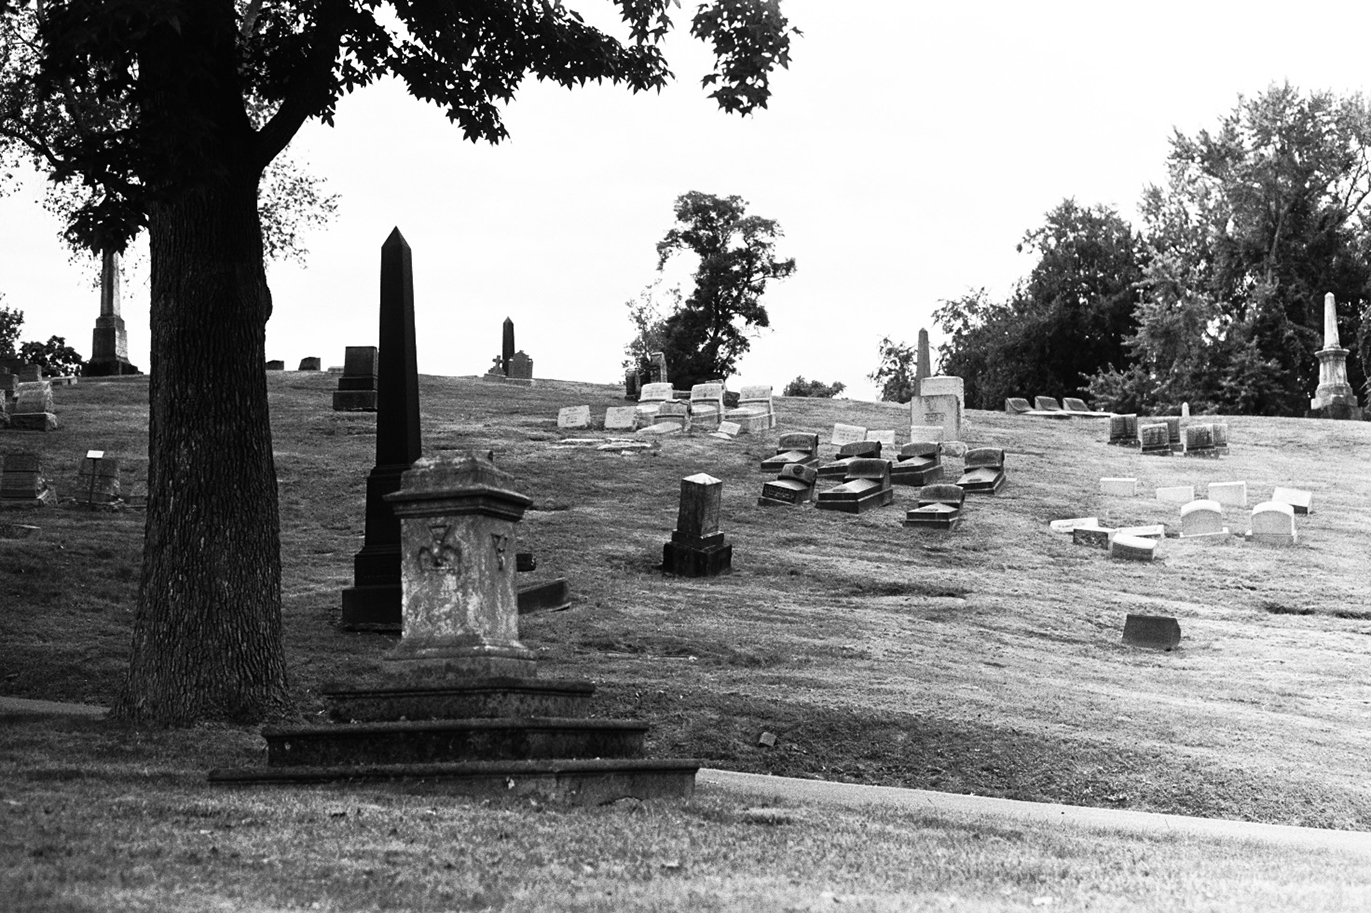 Various gravestones and monuments on a hill in black and white.